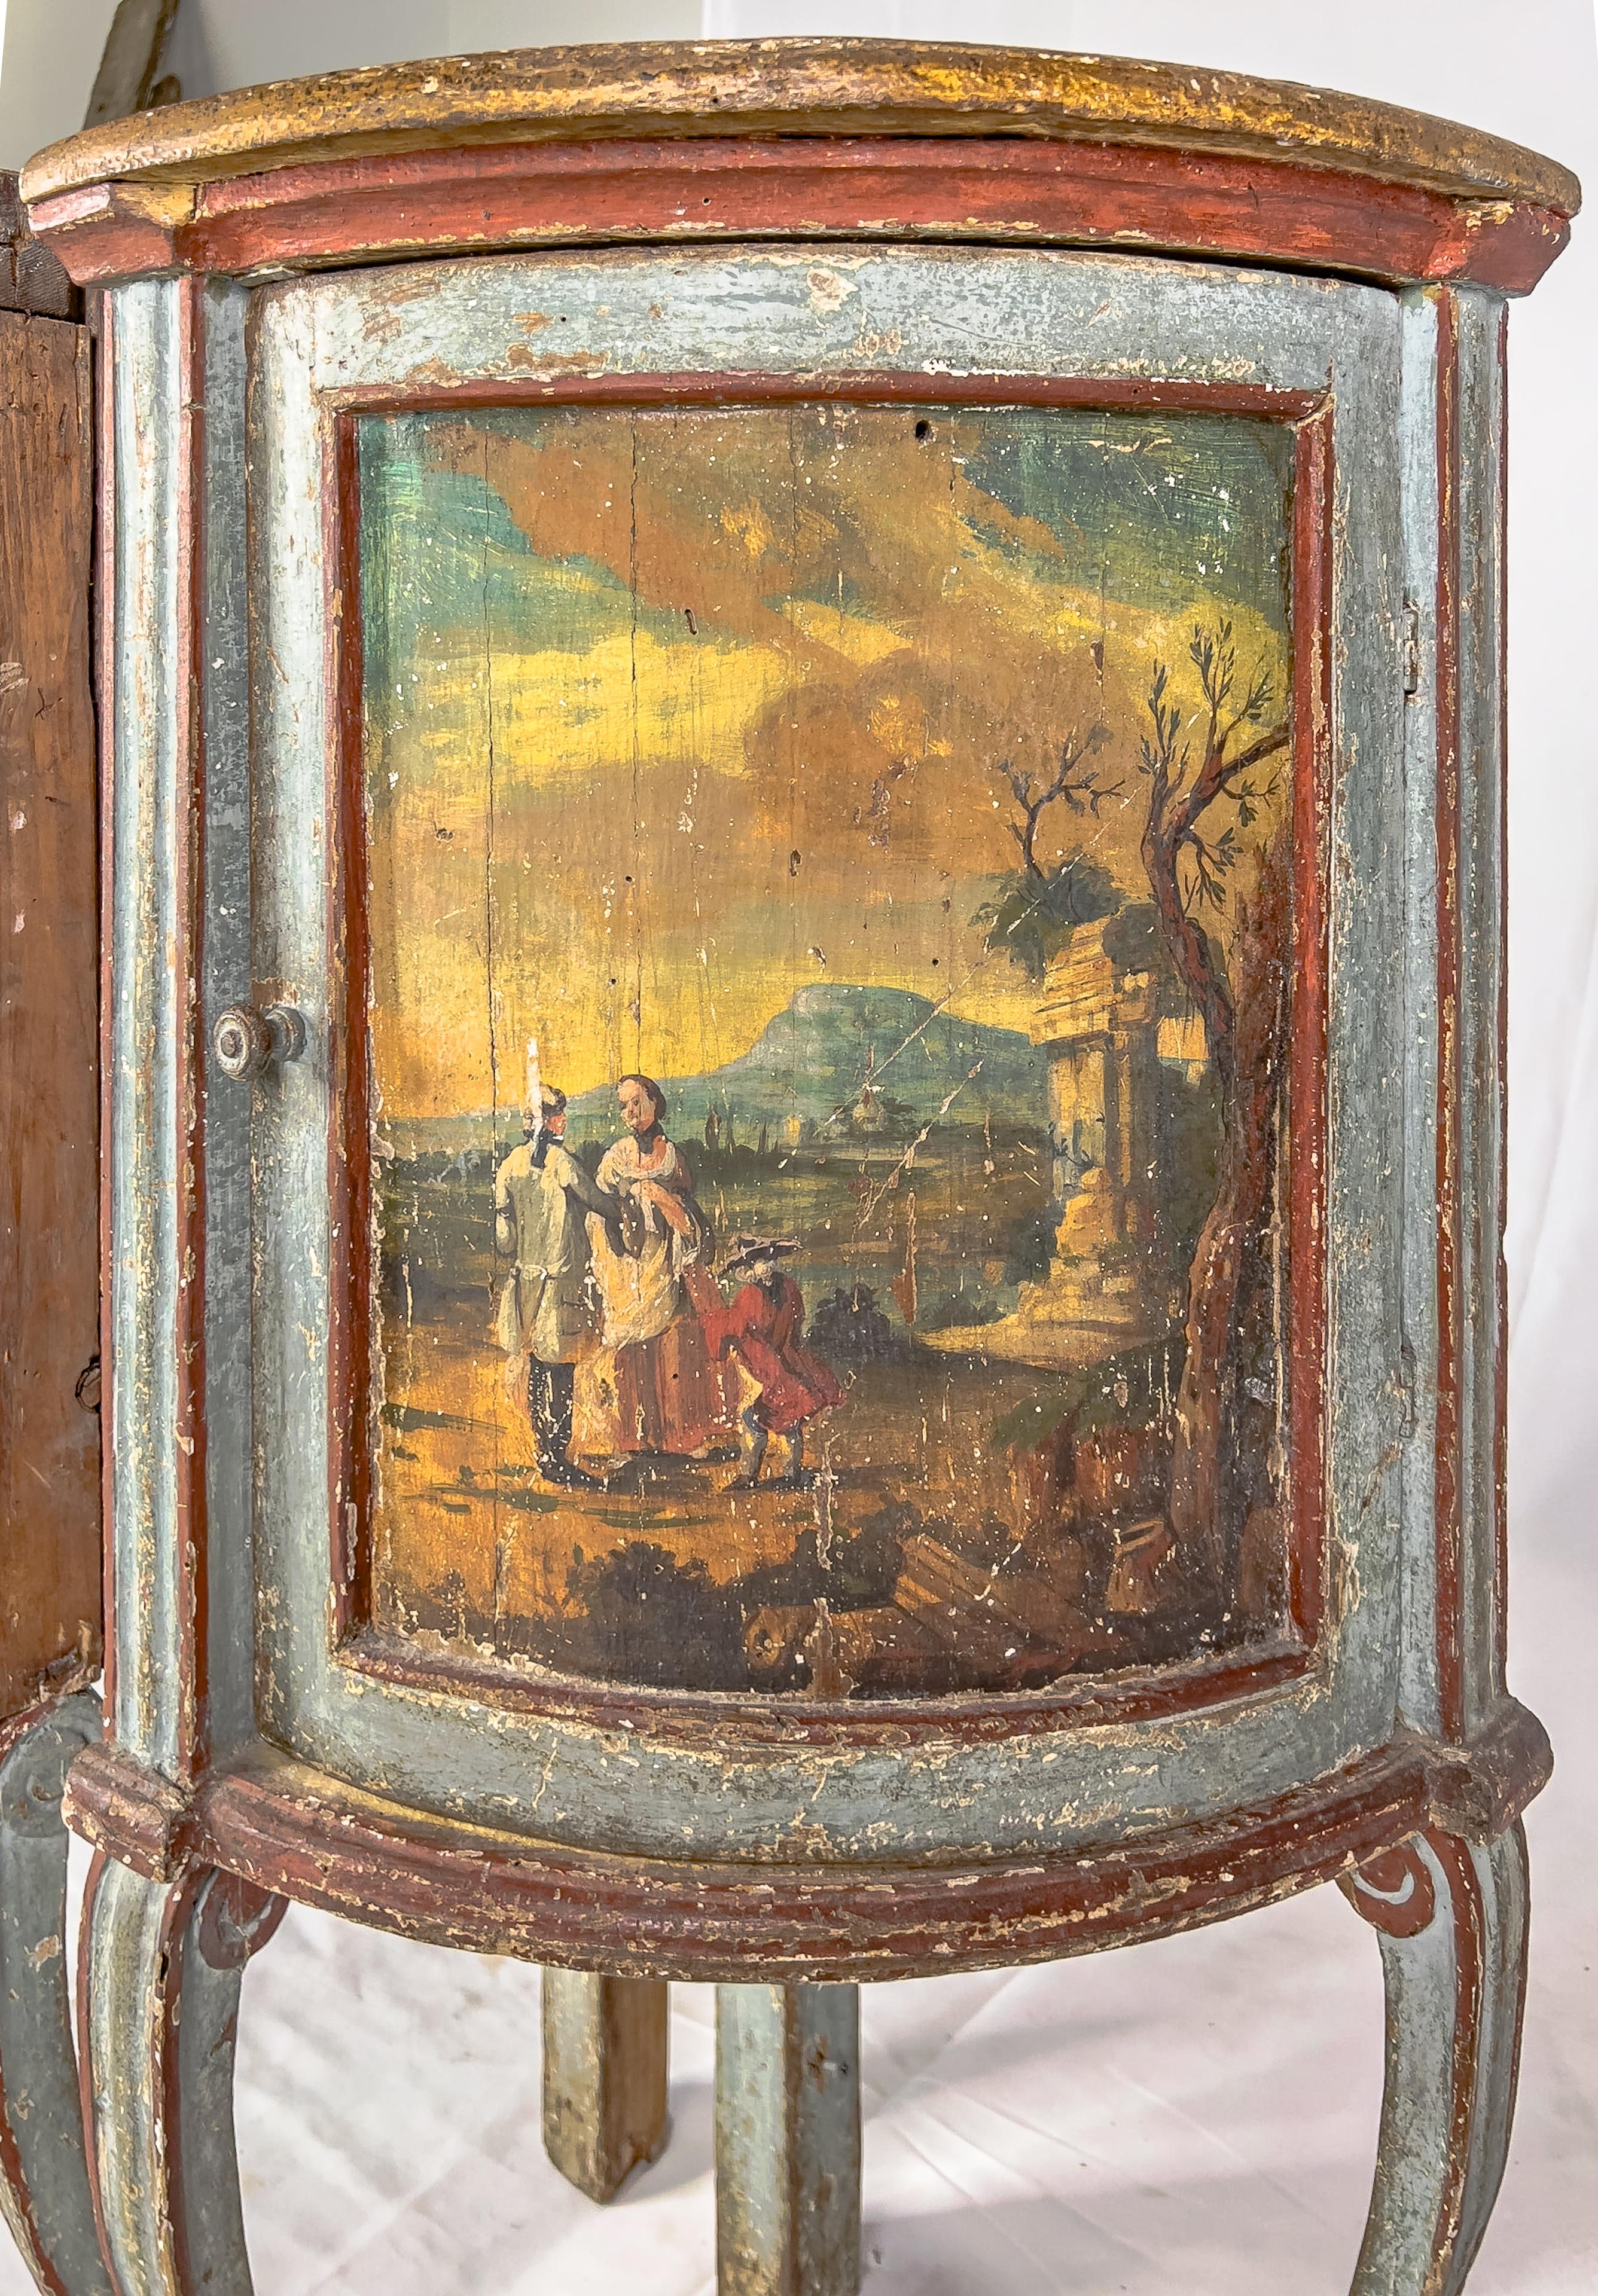 19th century Louis XV style hand-painted corner cabinets with cabriole legs. Each cabinet front has a painting depicting pastoral scenes with people and architectural ruins.